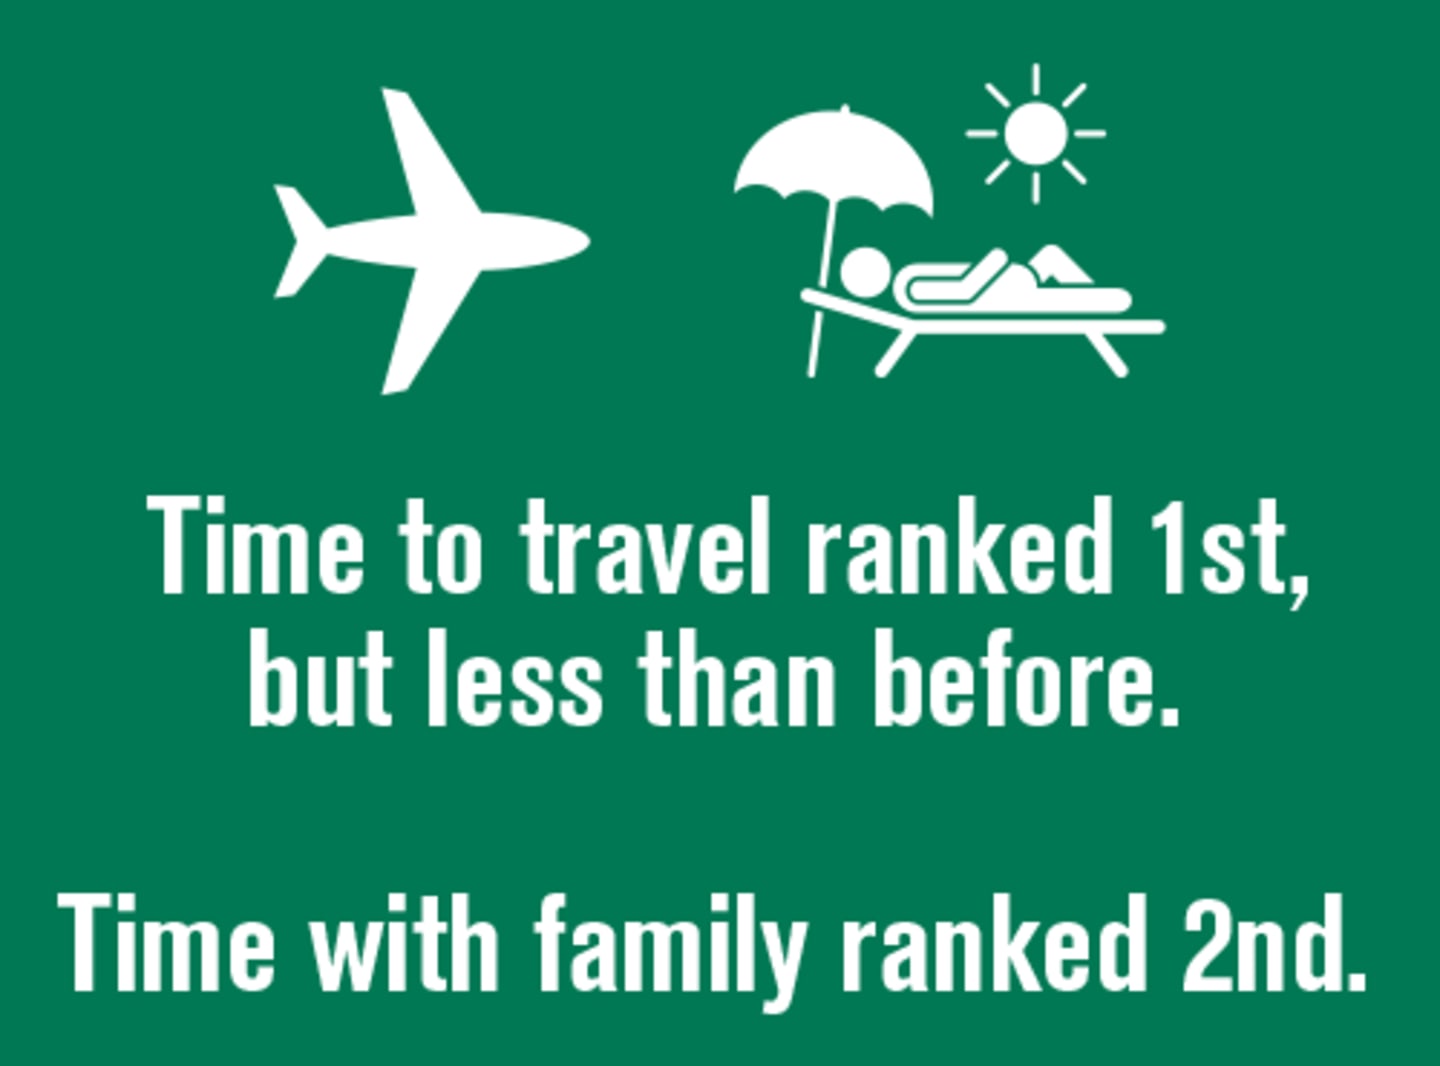 Time to travel ranked 1st, but less than before. Time with family ranked 2nd. 